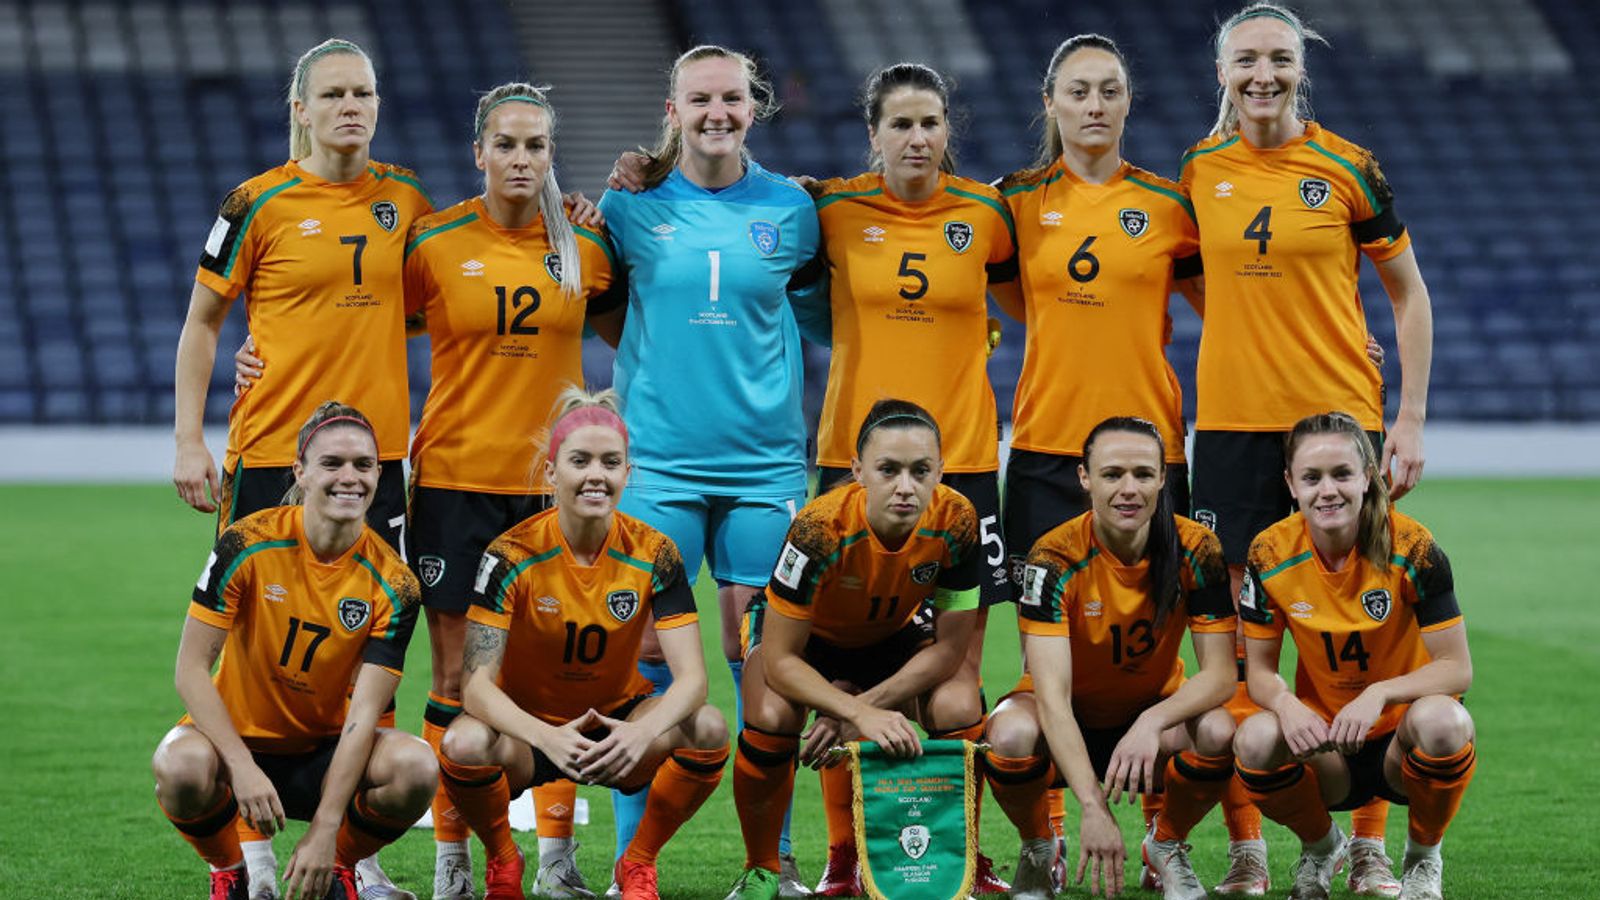 Ireland Women players have apologised for a 'song sung' during their World Cup play-off celebrations